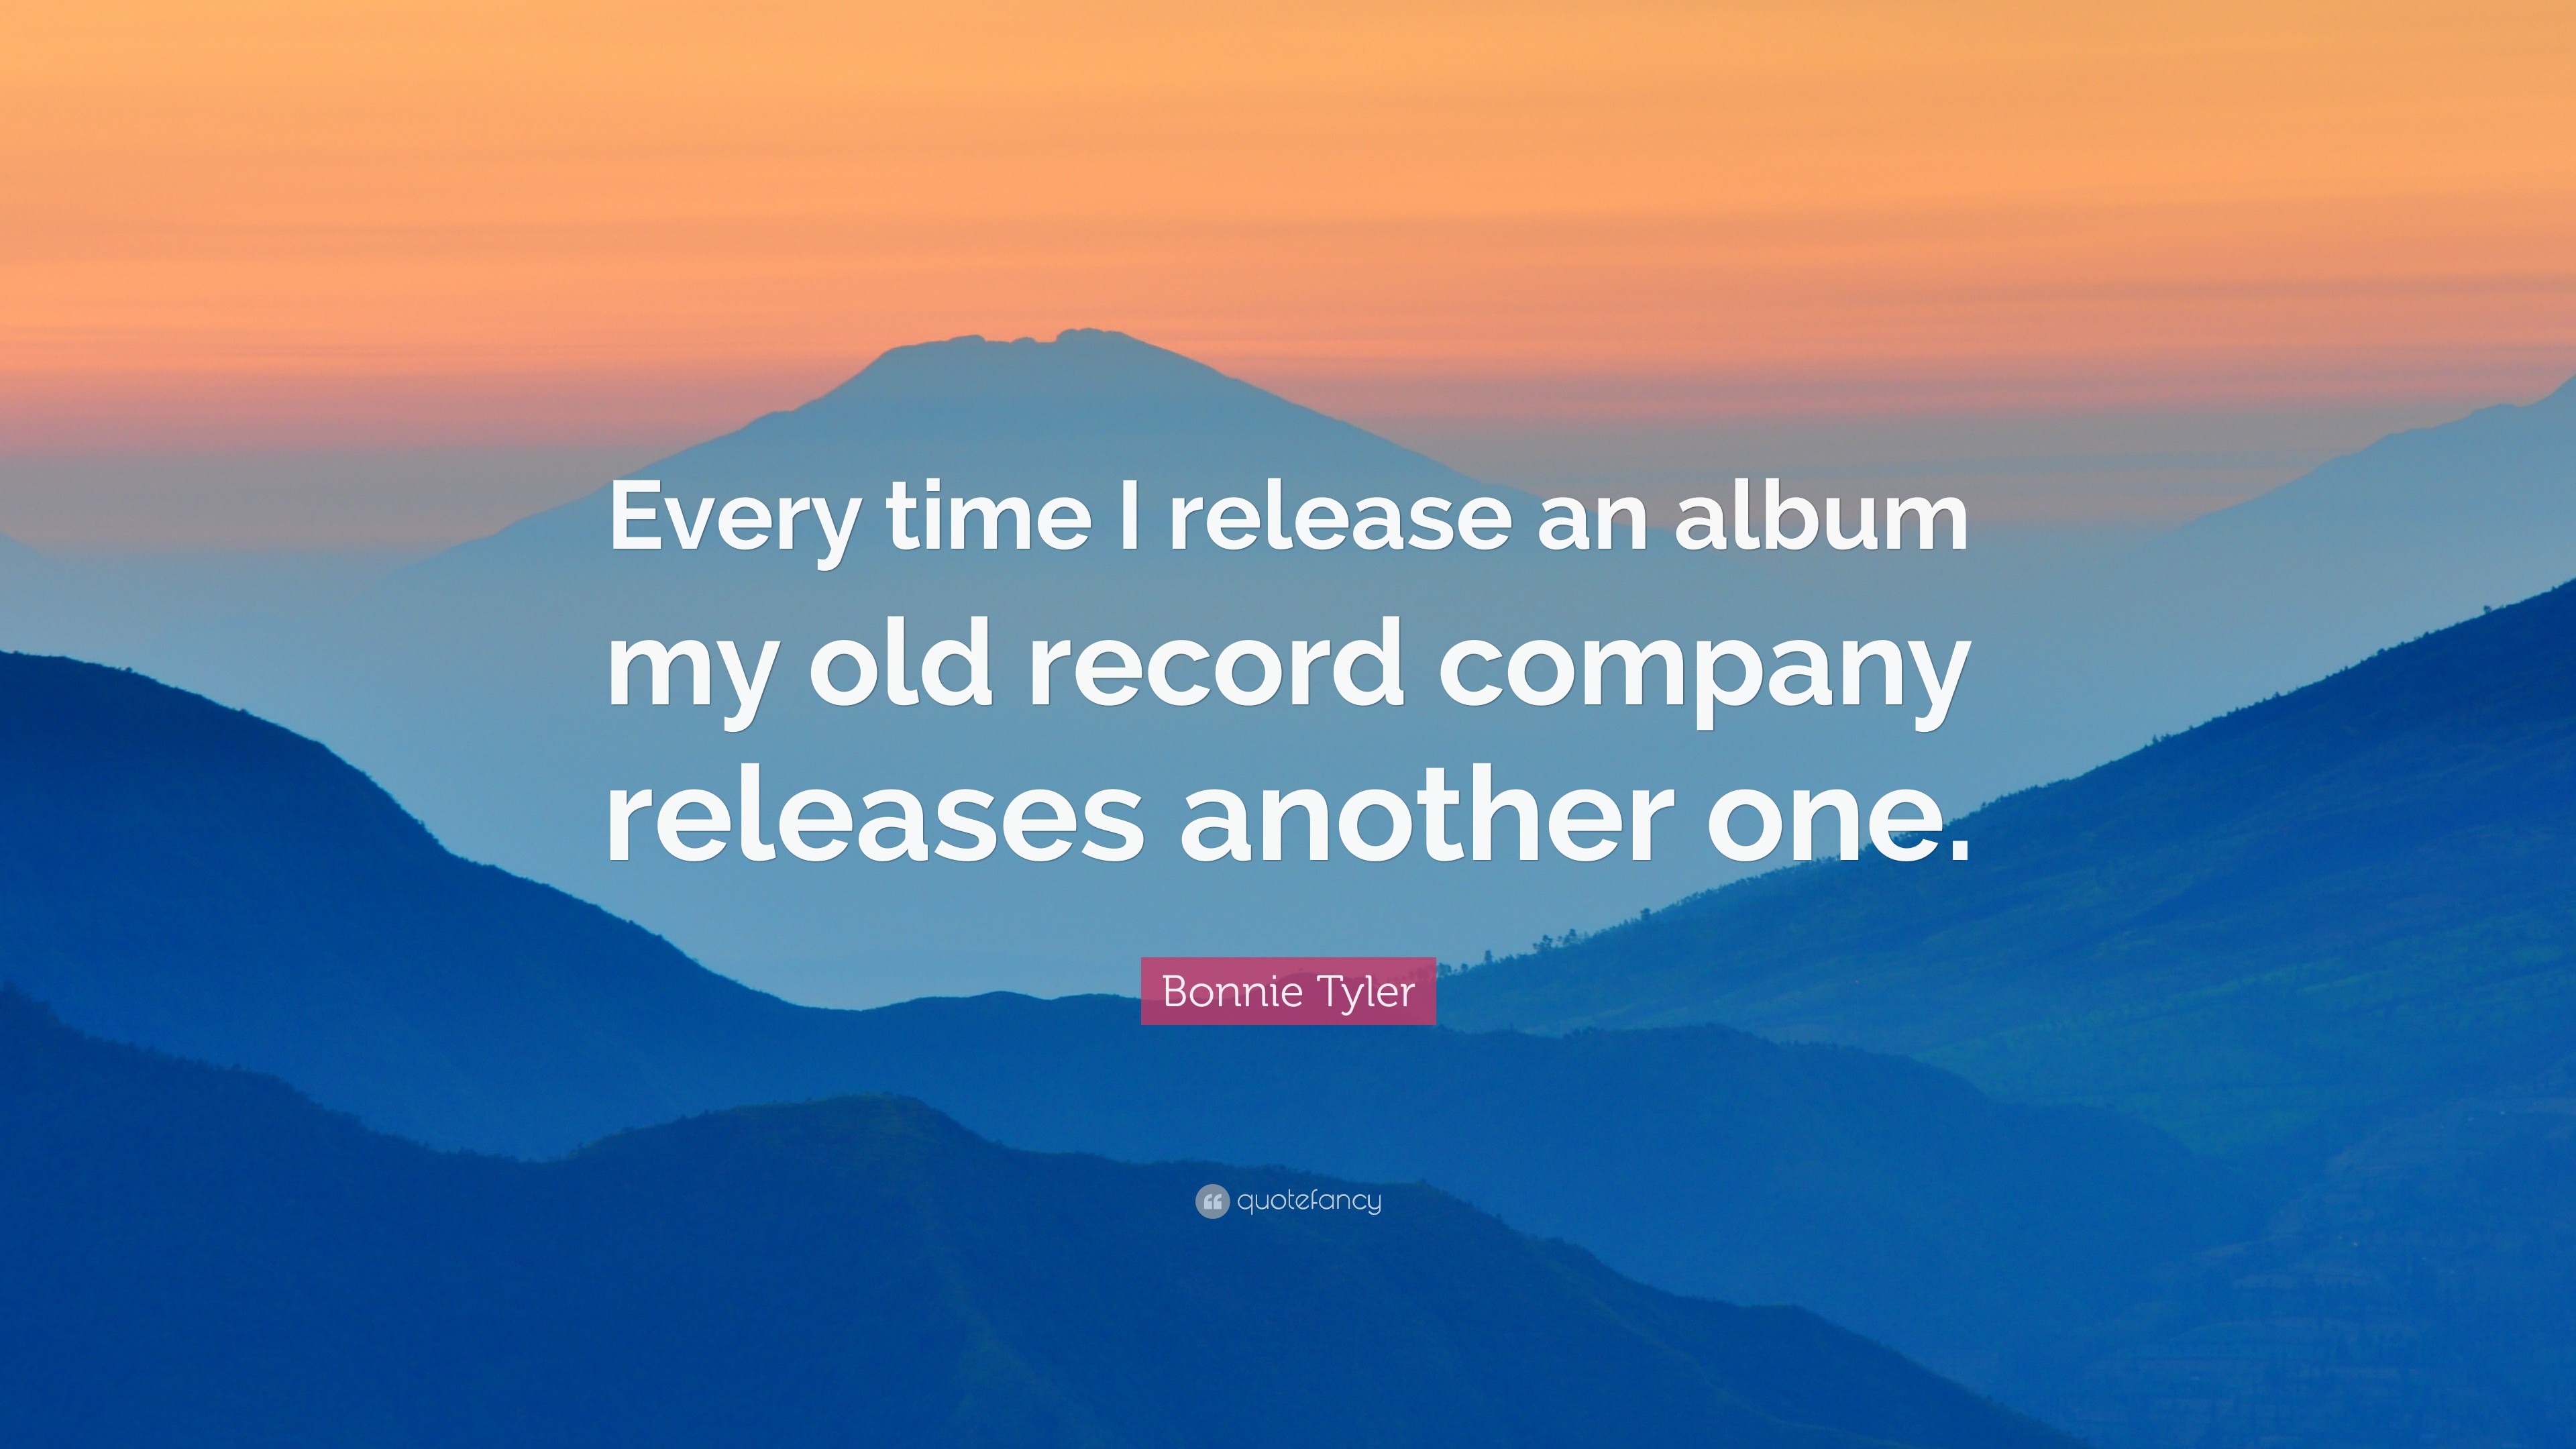 3840x2160 Bonnie Tyler Quote: “Every time I release an album my old record company  releases